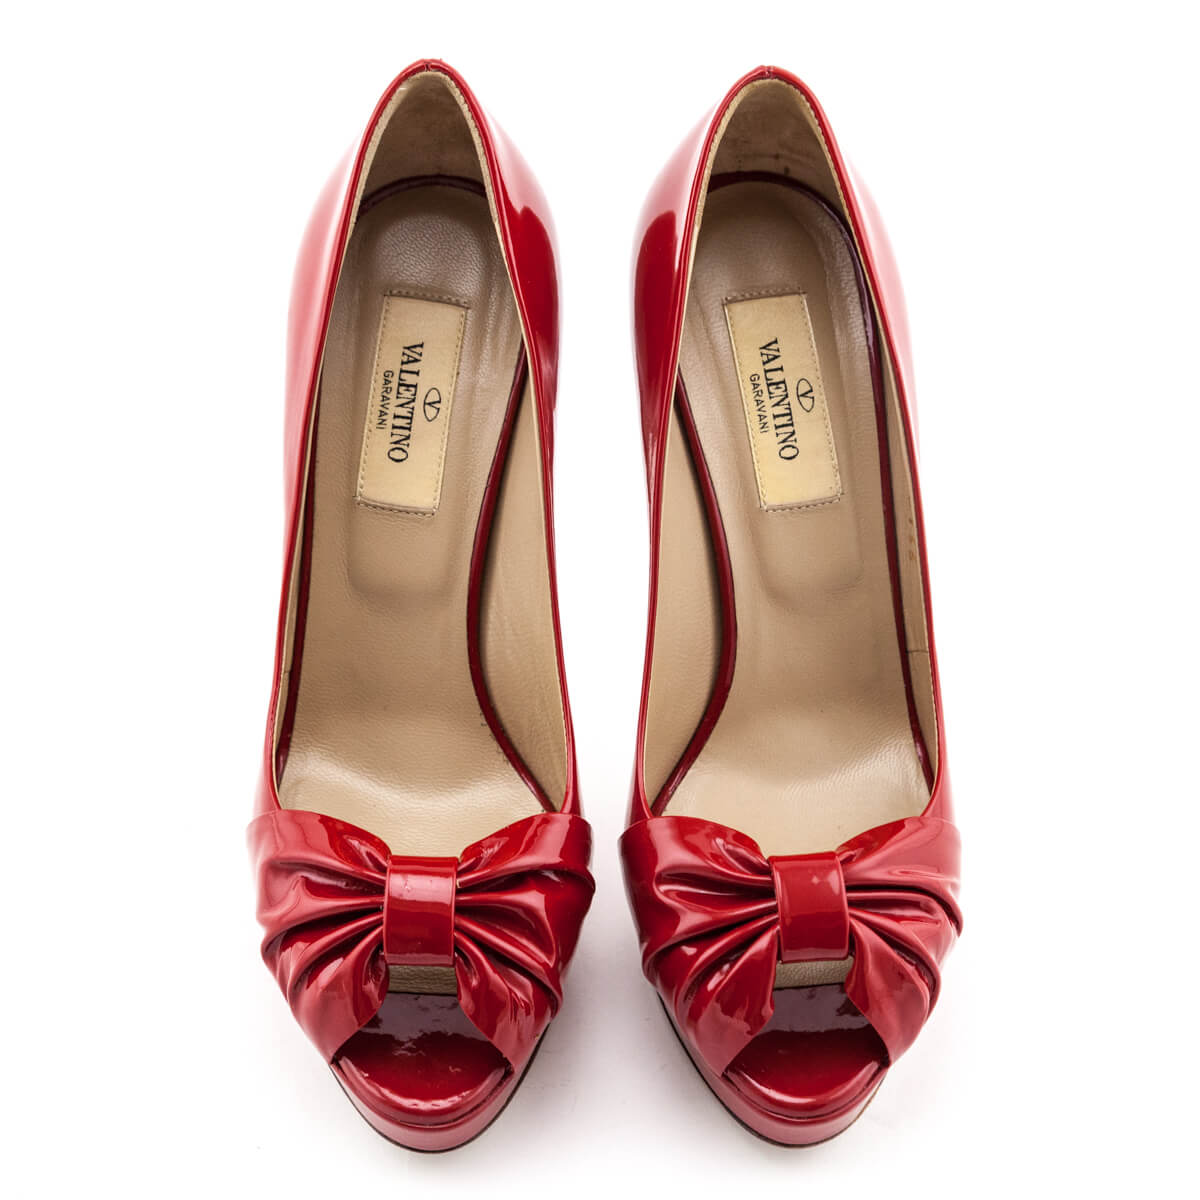 Valentino Red Patent Leather Platform Bow Pumps Online Consignment